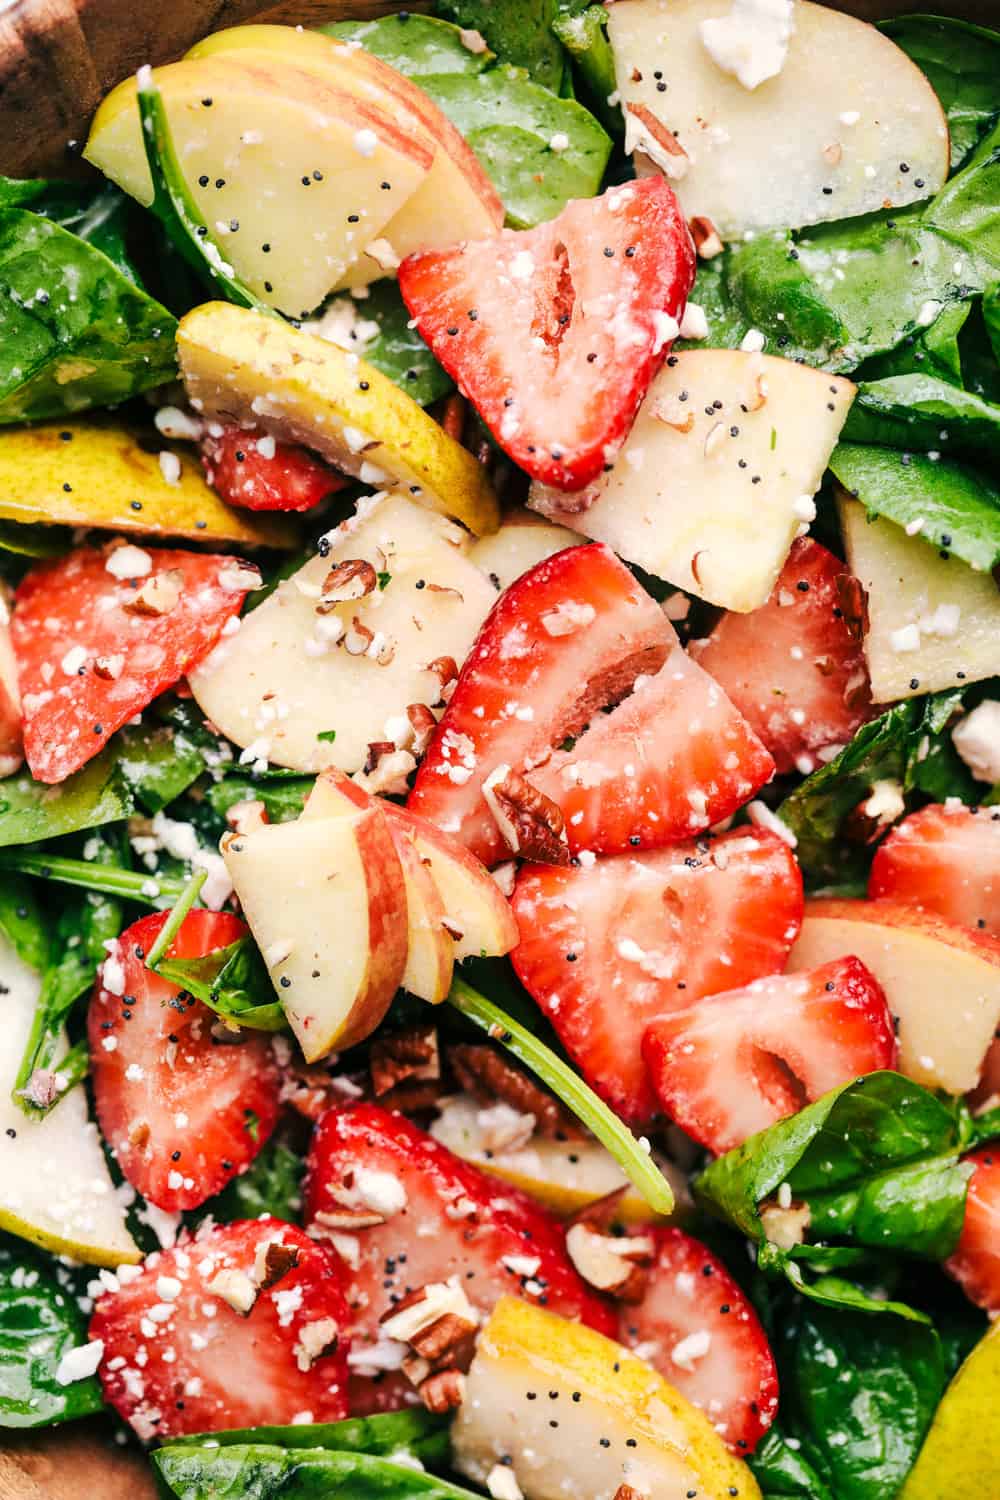 Strawberry, Apple, and Pear Spinach Salad with an Apple Cider Poppyseed ...